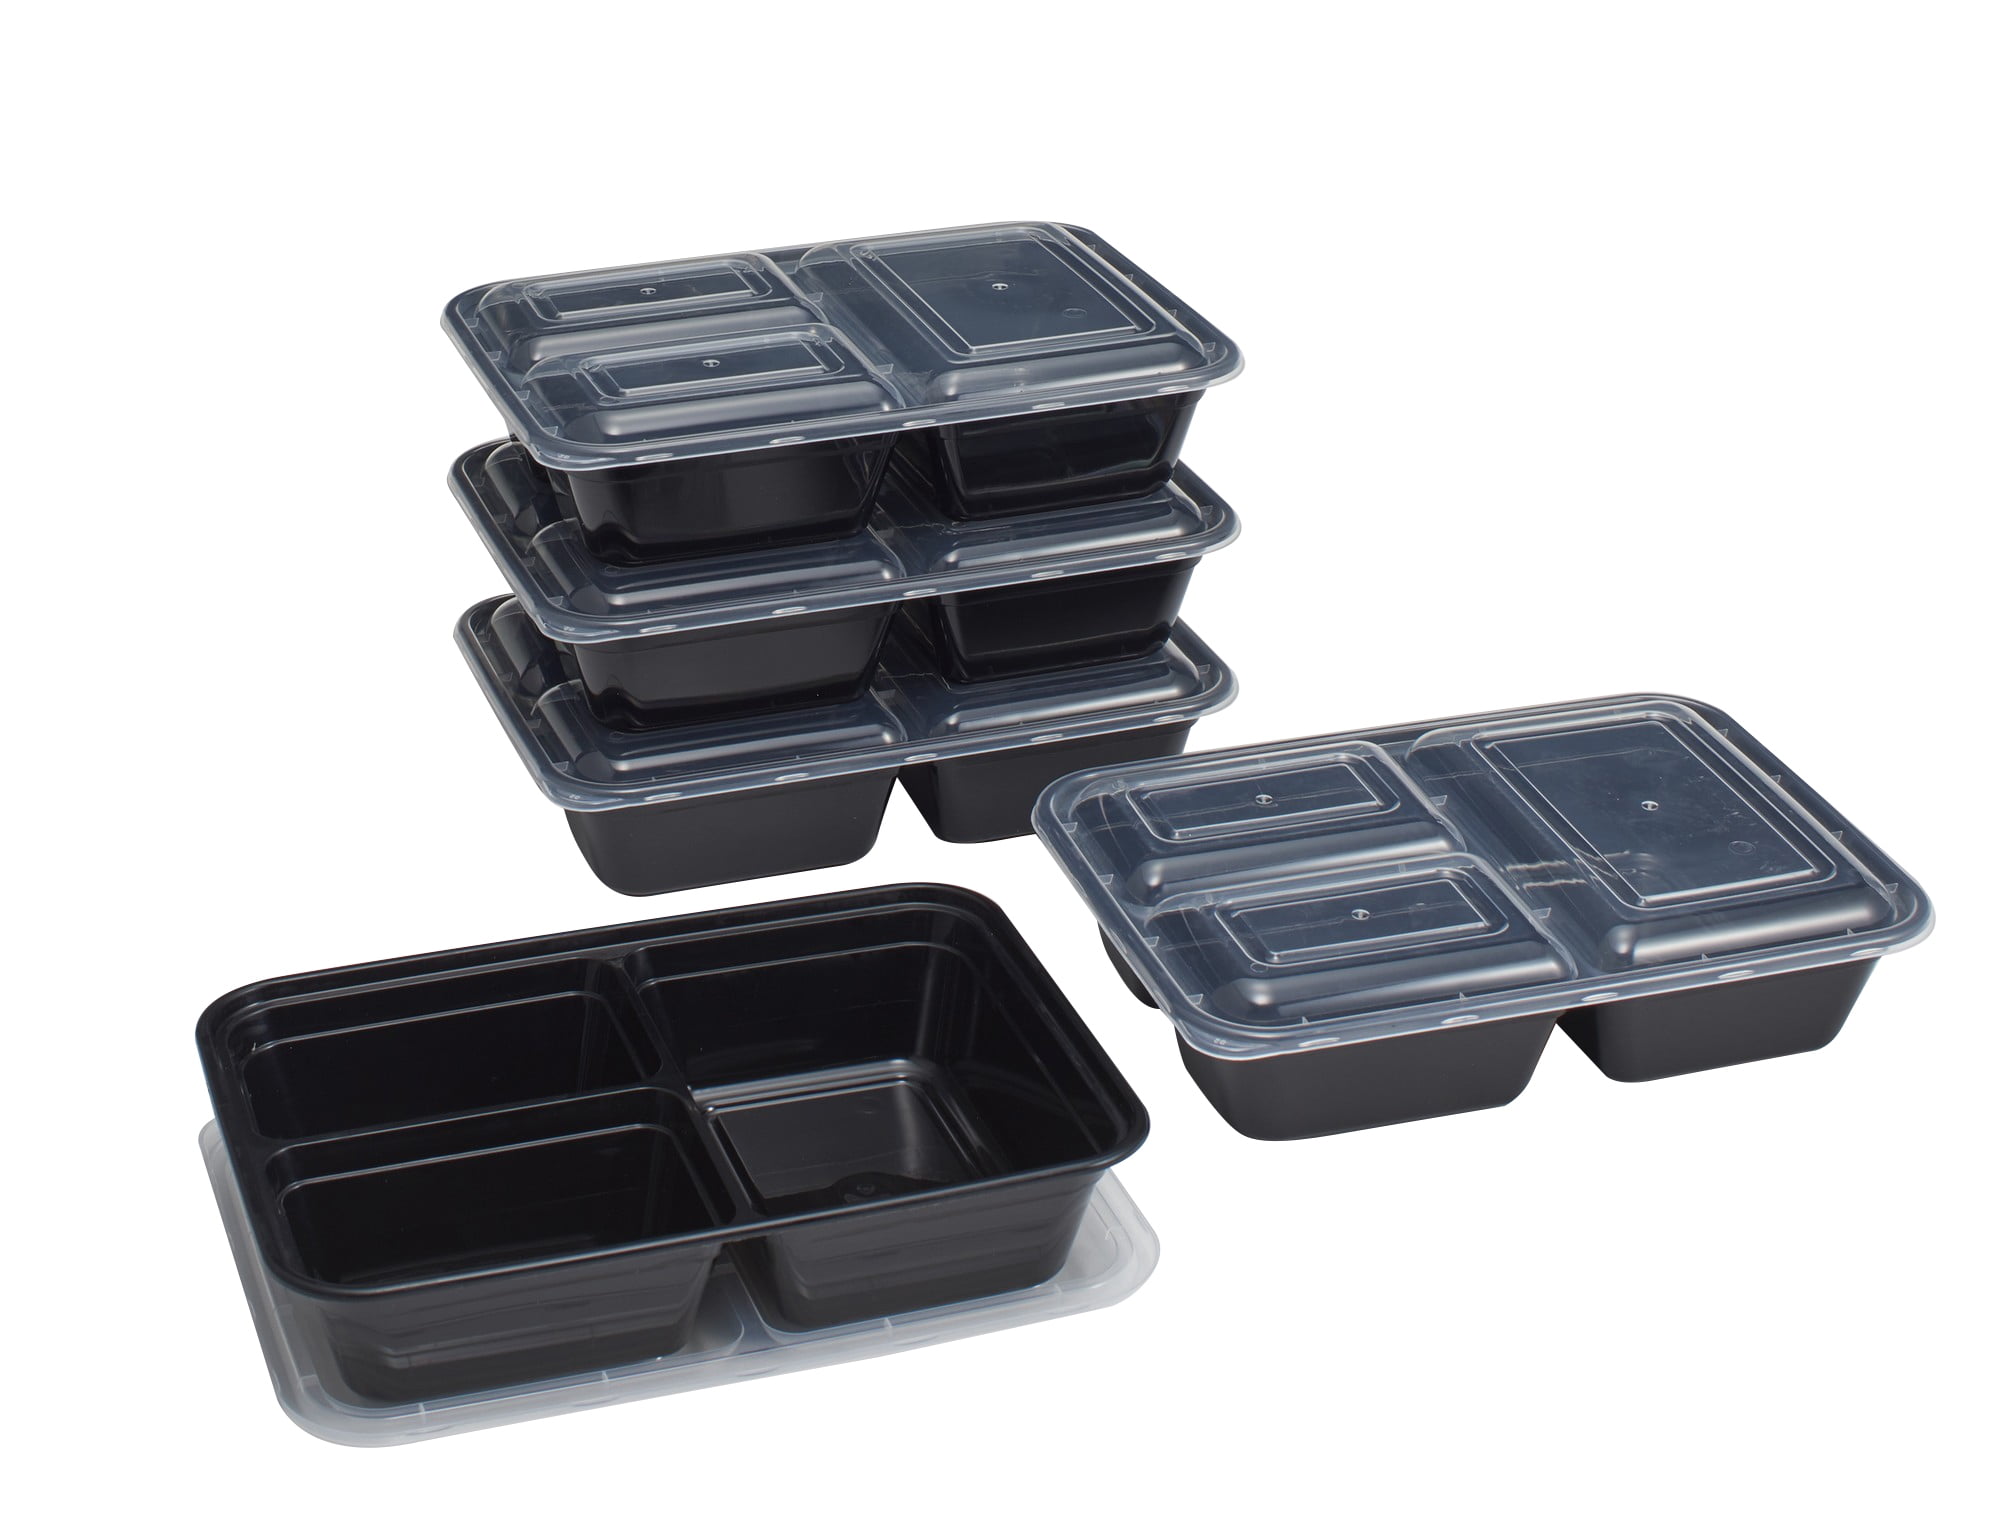 12 Meal Prep Containers 3 Compartment Plate W/ Lids Reusable Food Storage  30oz, 1 - Harris Teeter